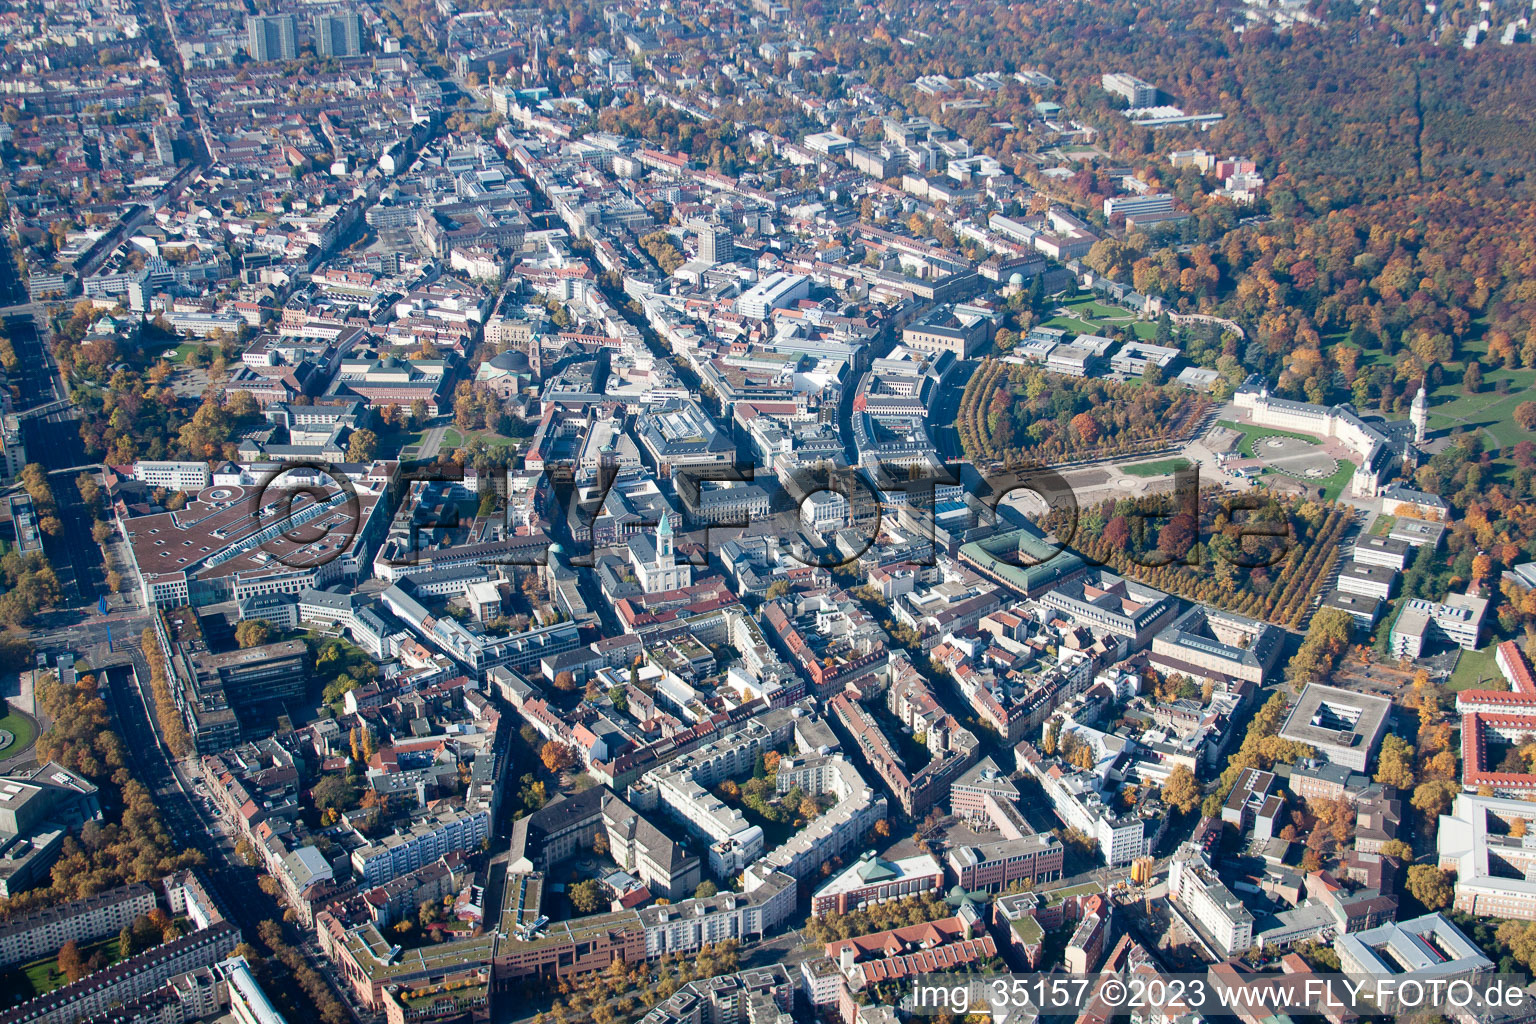 Aerial view of Karlsruhe Castle in the center of the circle in the district Innenstadt-Ost in Karlsruhe in the state Baden-Wuerttemberg, Germany